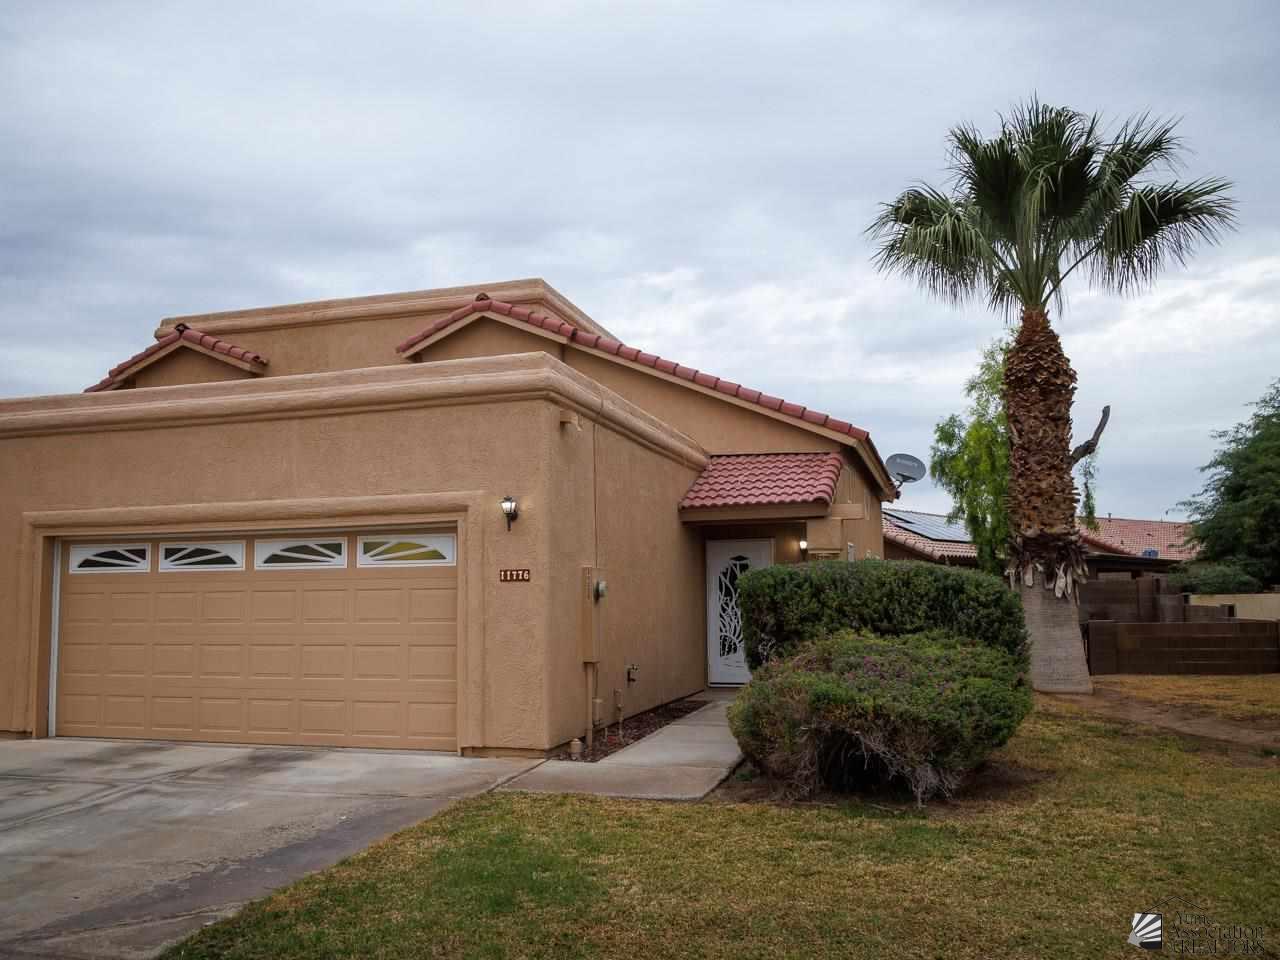  Discover Your Dream Single Family Home in Yuma, AZ with The Realty Agency